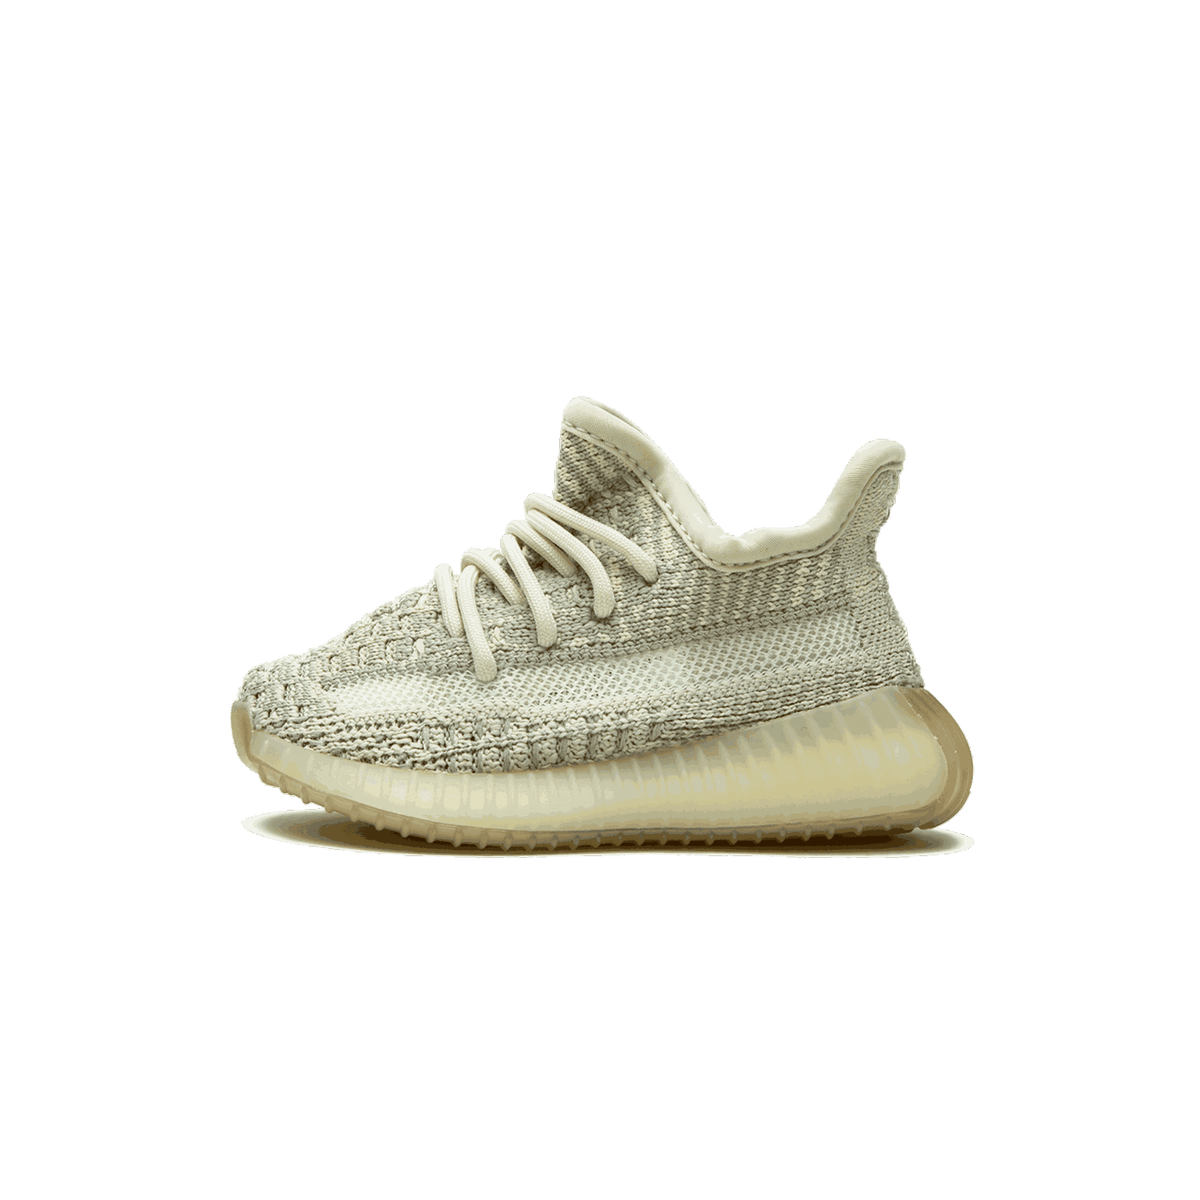 Adidas Yeezy Boost 350 V2 Infant 'Citrin Non-Reflective' - Kick Game